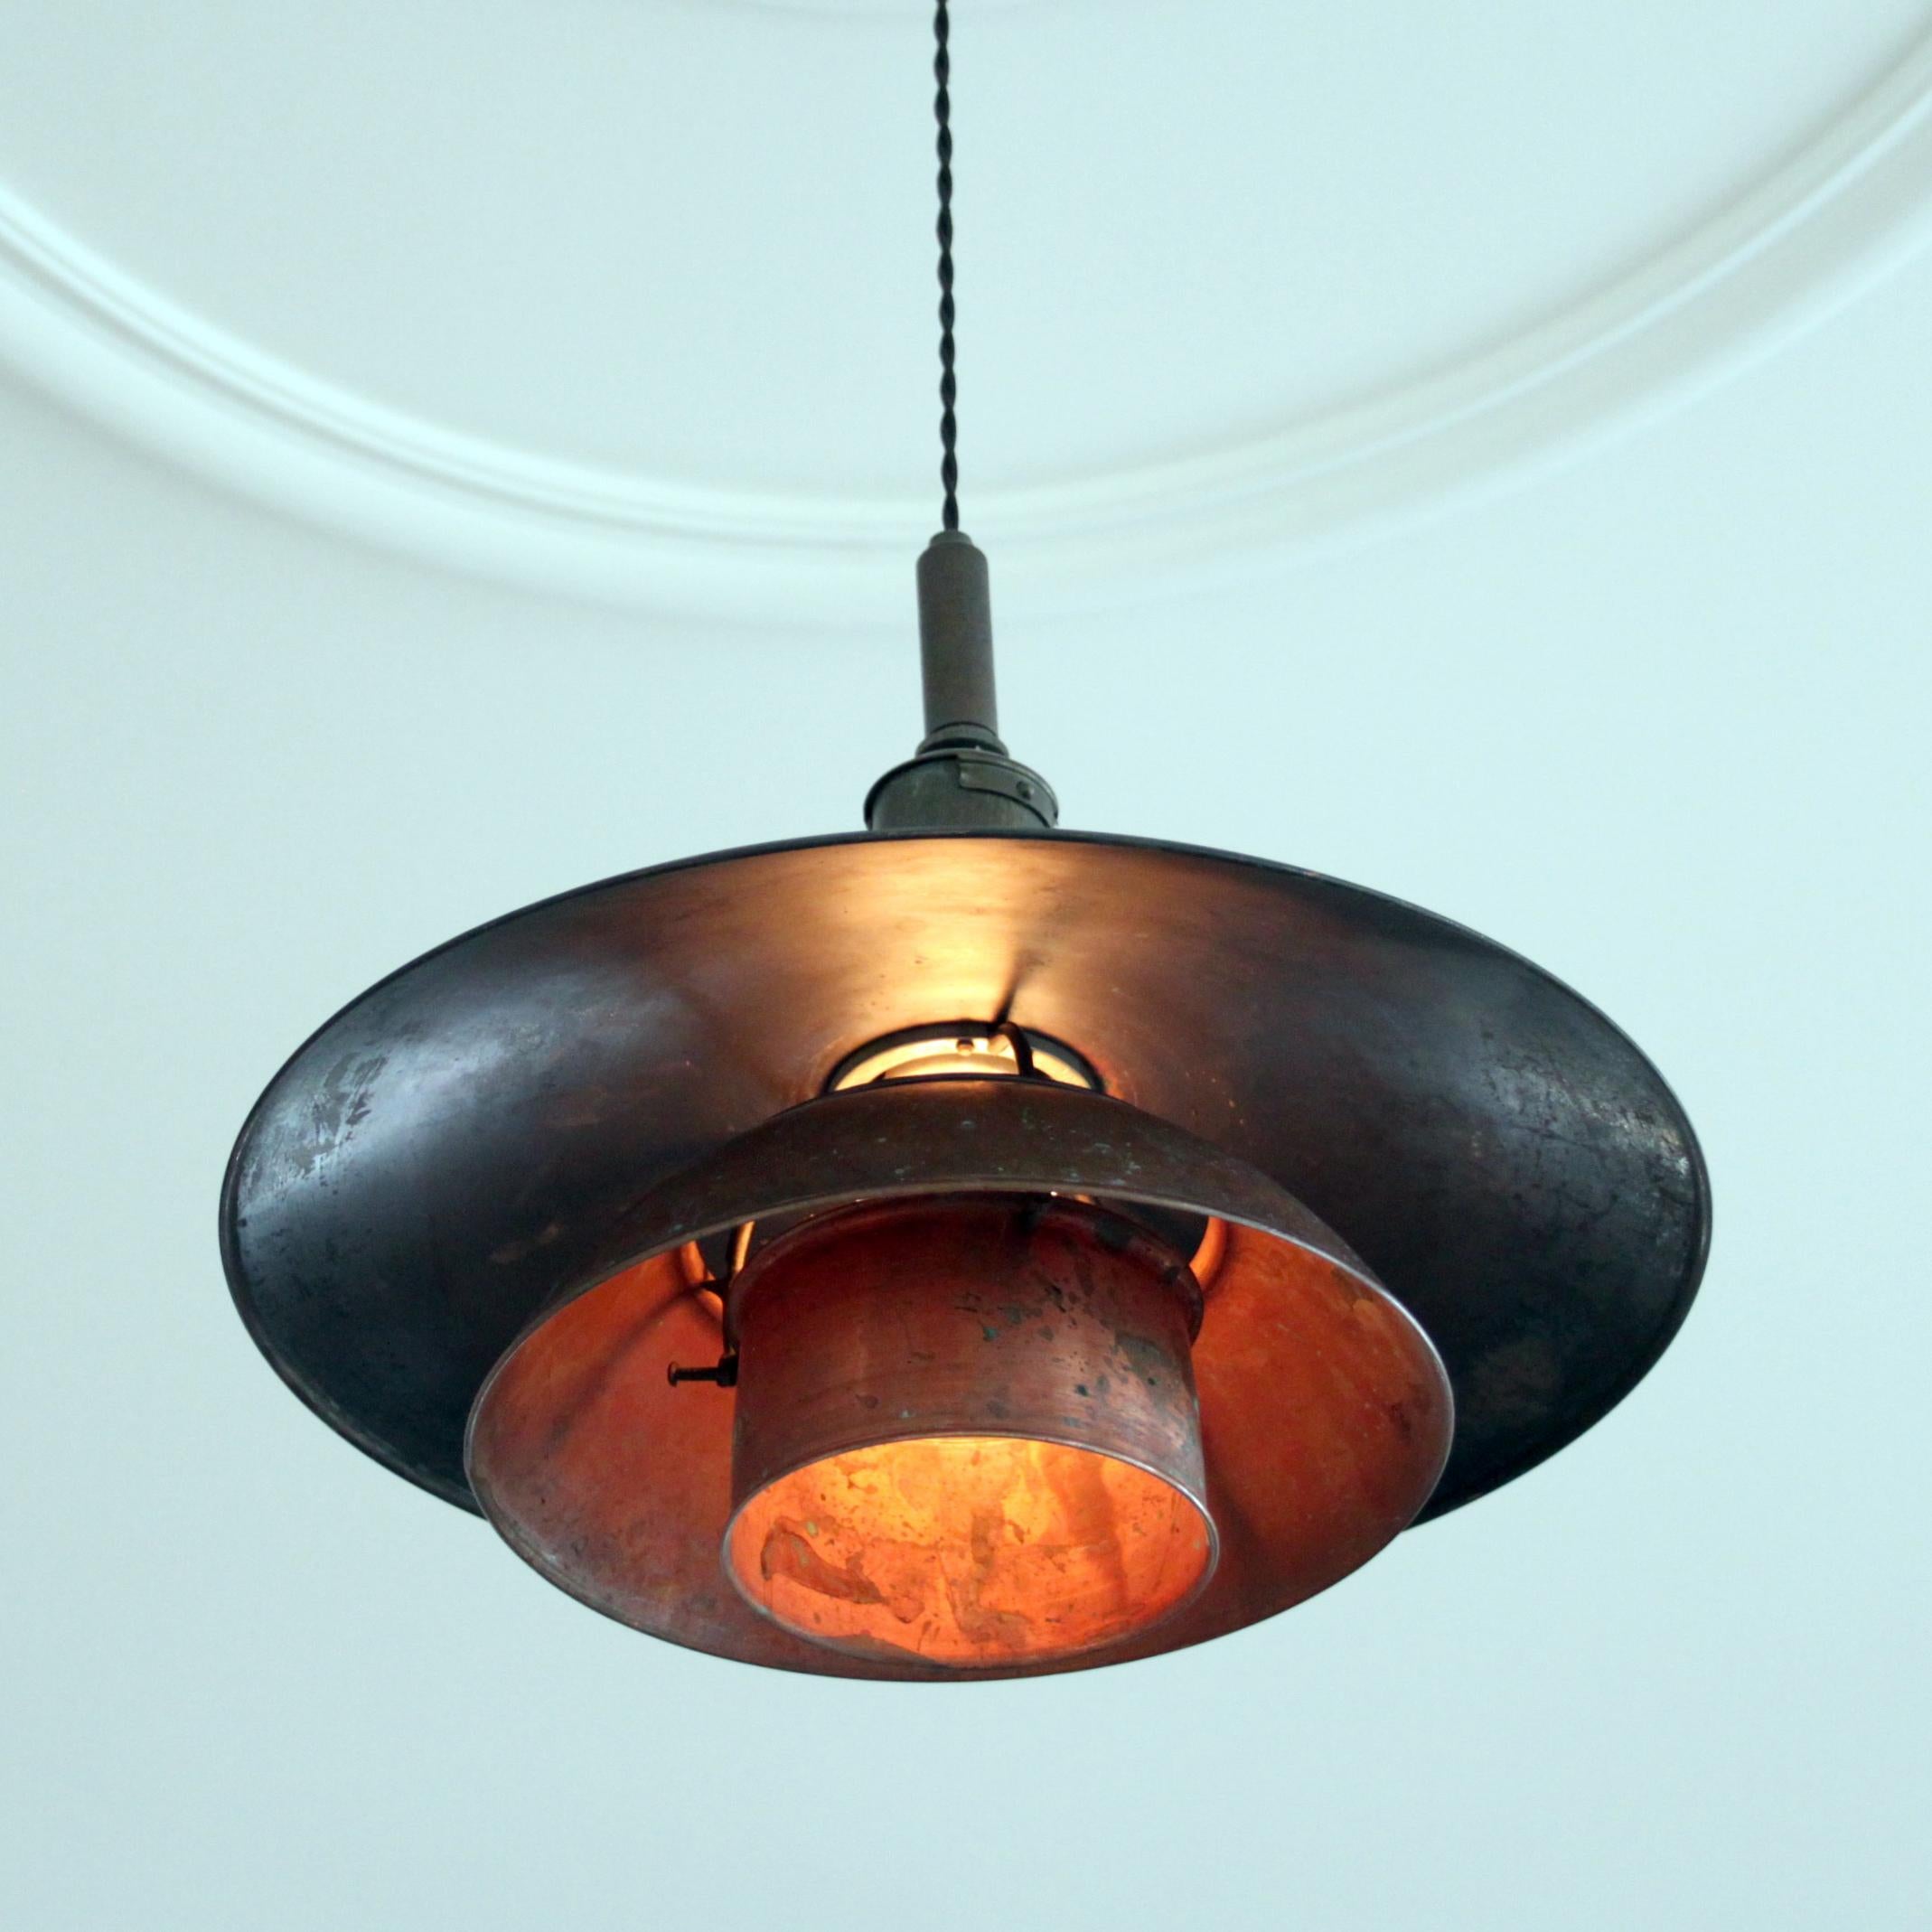 20th Century Early and Large Poul Henningsen Pendant 4/4 Pat, Appl, Copper, Denmark, 1928